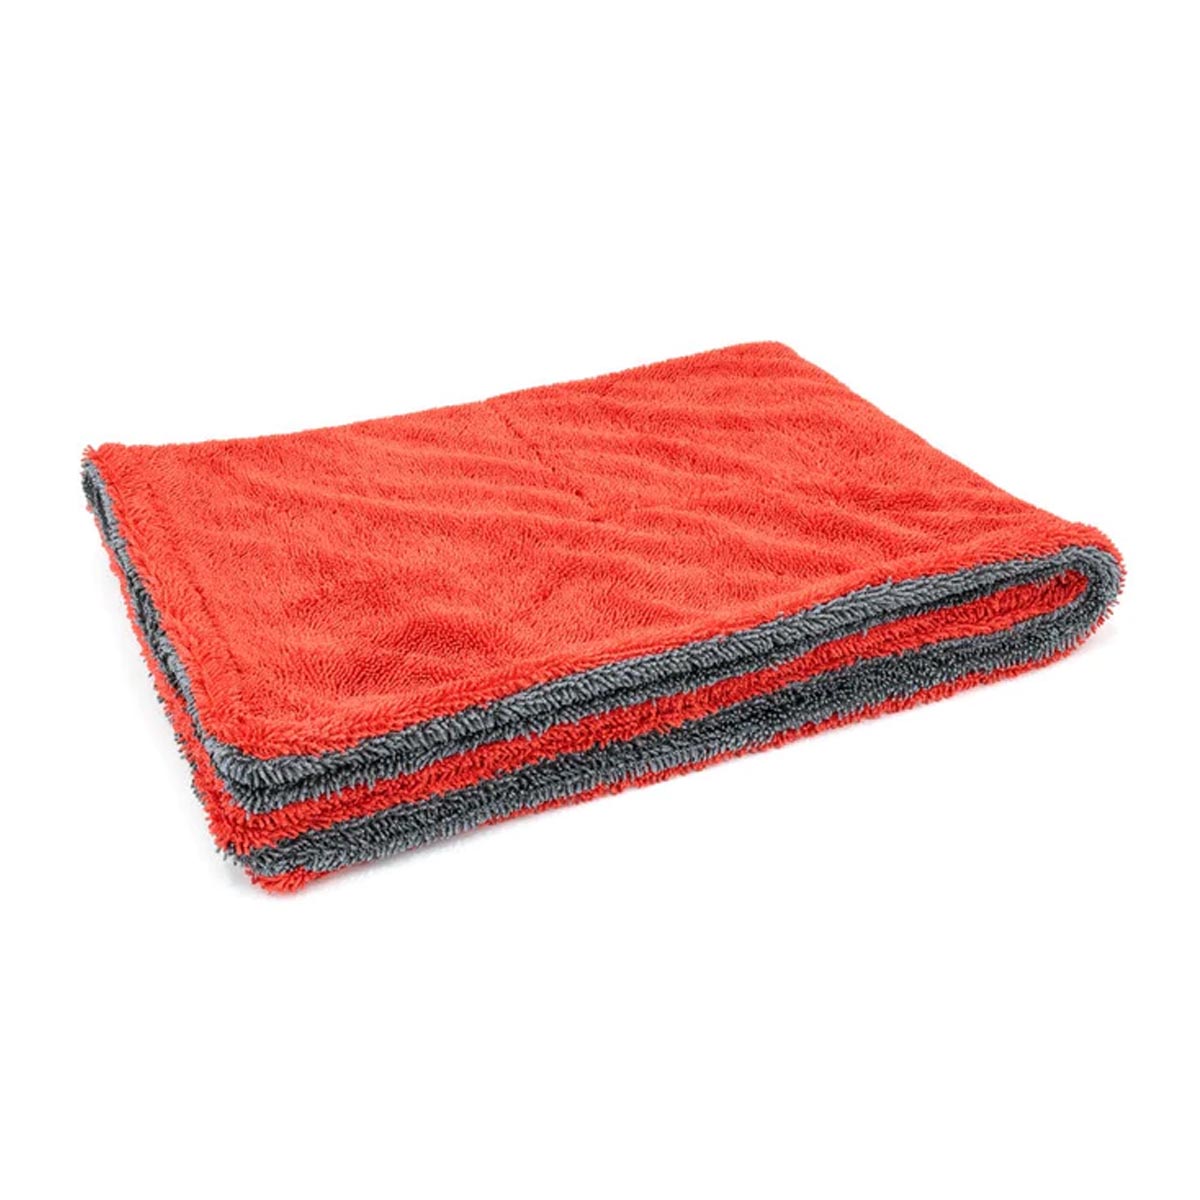 [Dreadnought] Best Microfiber Towels For Cars (1PK)